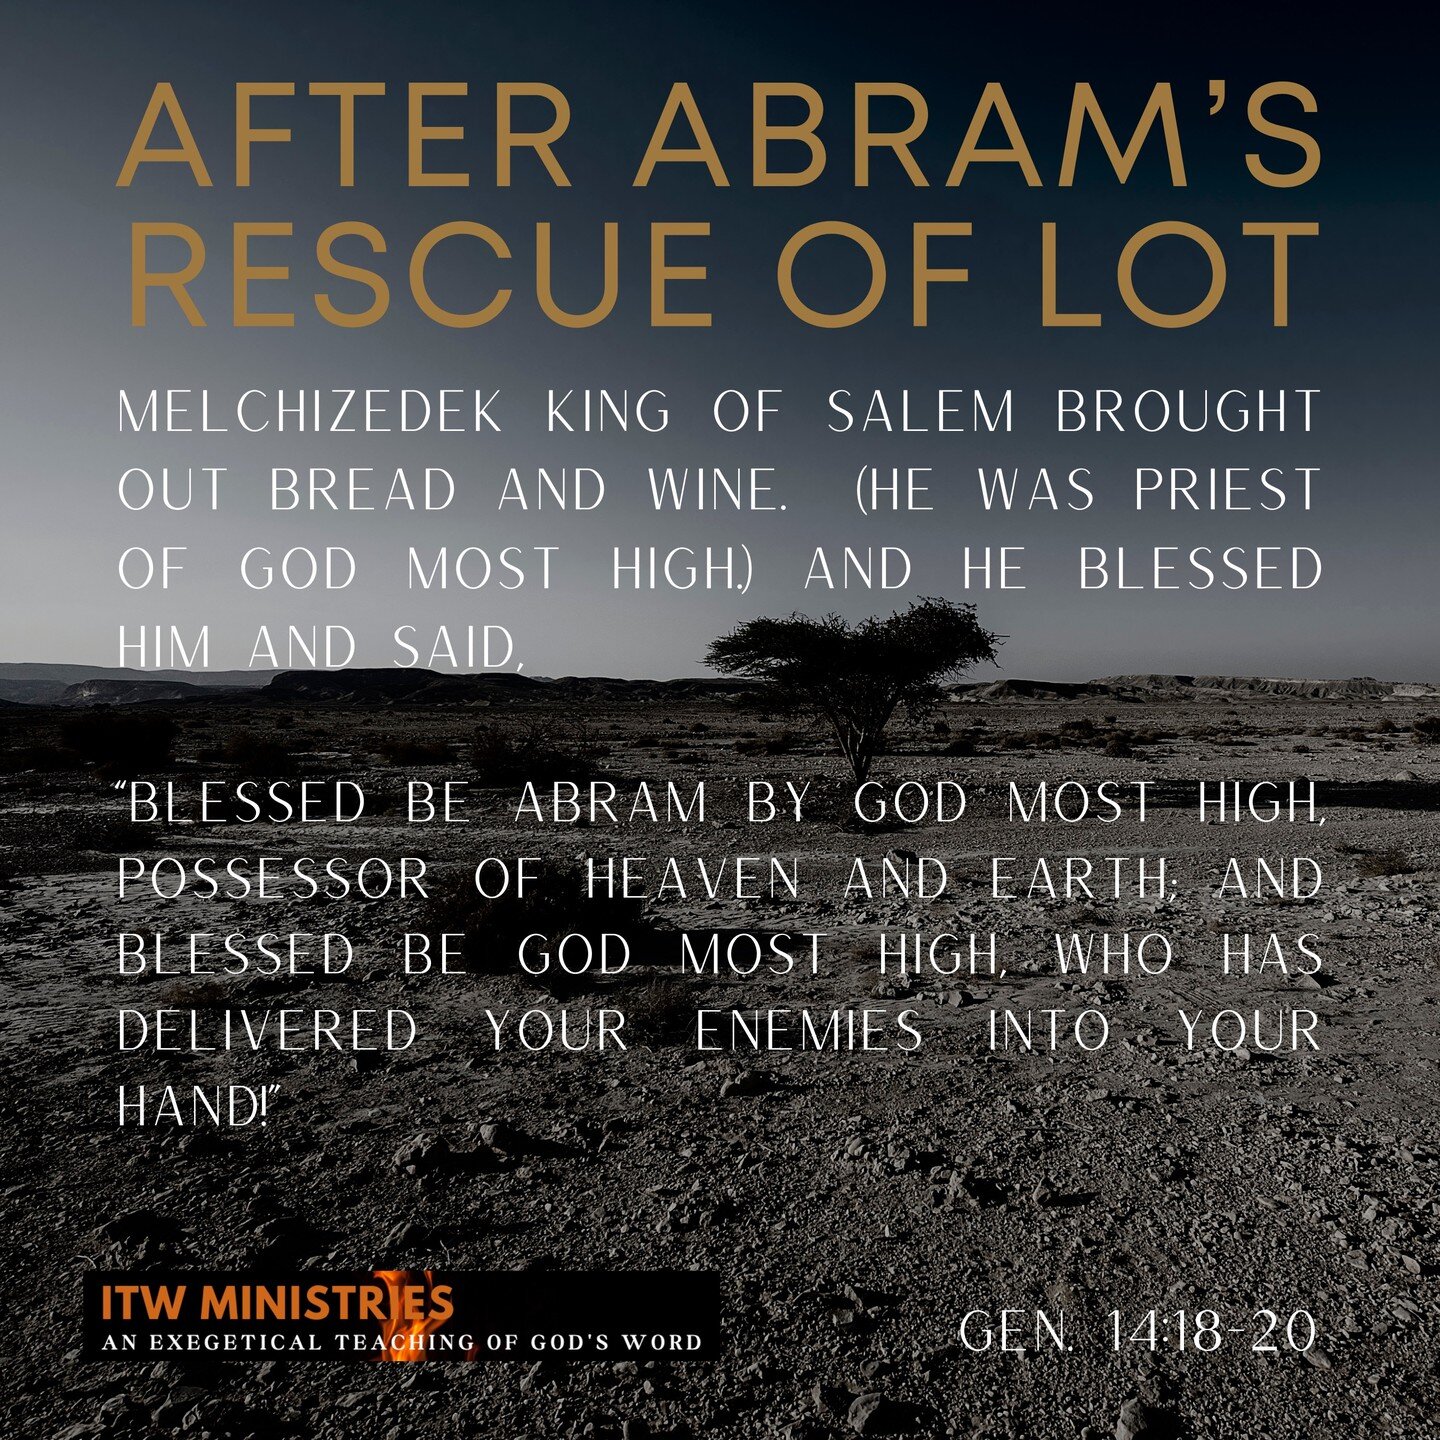 When Abram heard that his kinsman had been taken captive, he led forth his trained men, born in his house, 318 of them, and went in pursuit as far as Dan. And he divided his forces against them by night, he and his servants, and defeated them and pur